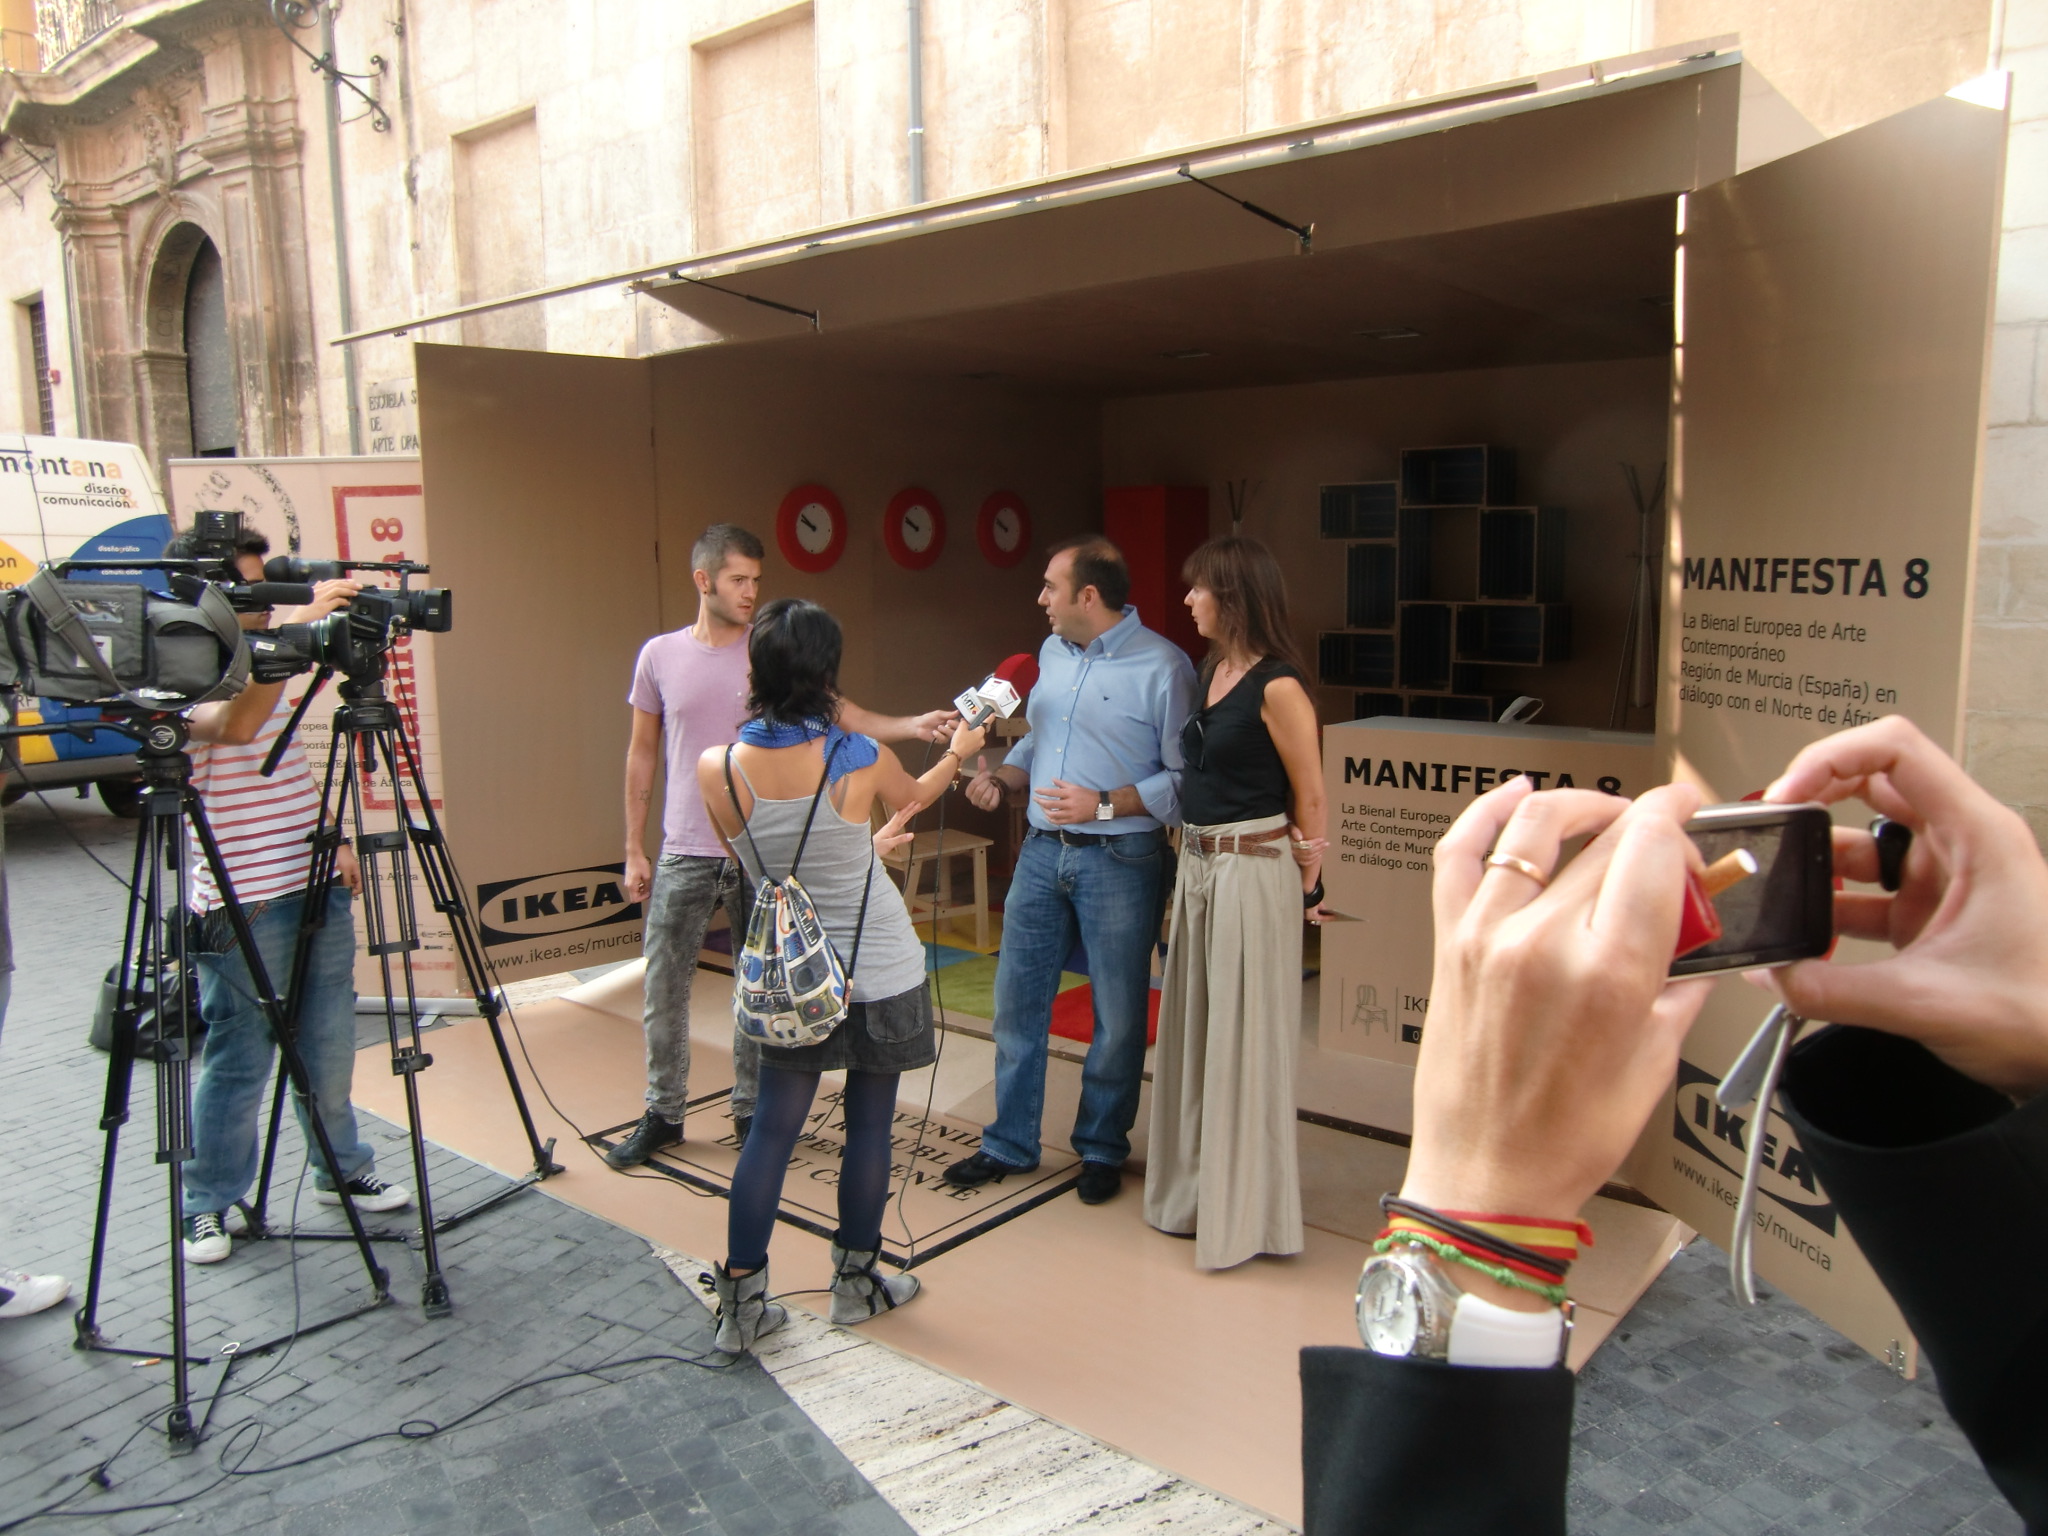 Manifesta 8 opens two infomation points in the center of Murcia